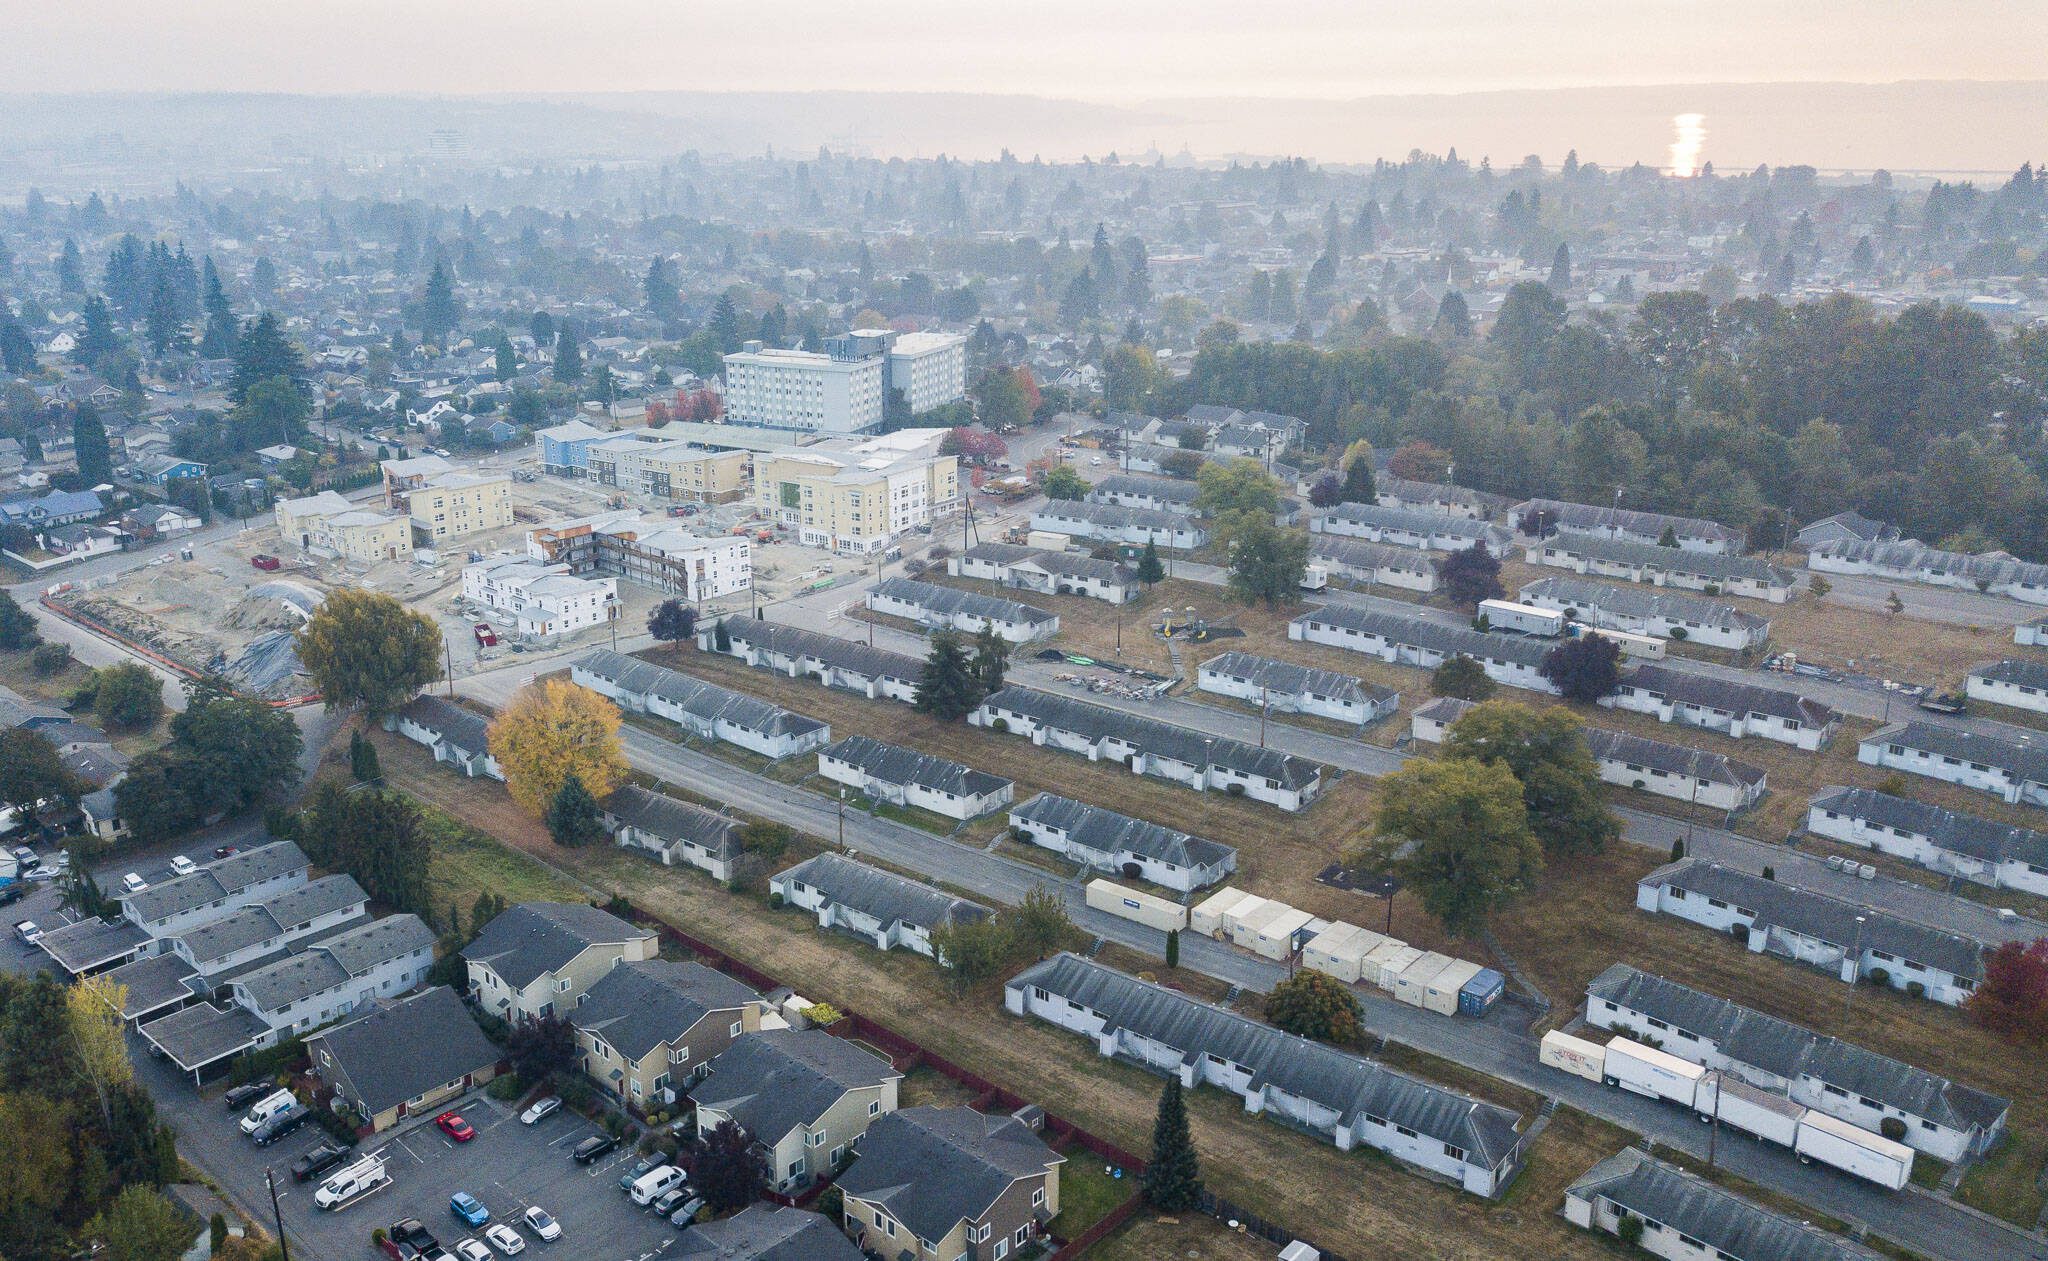 Everett Housing Authority is asking for city approval for it’s proposed development of 16 acres of land currently occupied by the vacant Baker Heights public housing development on Tuesday, Oct. 18, 2022 in Everett, Washington. (Olivia Vanni / The Herald)